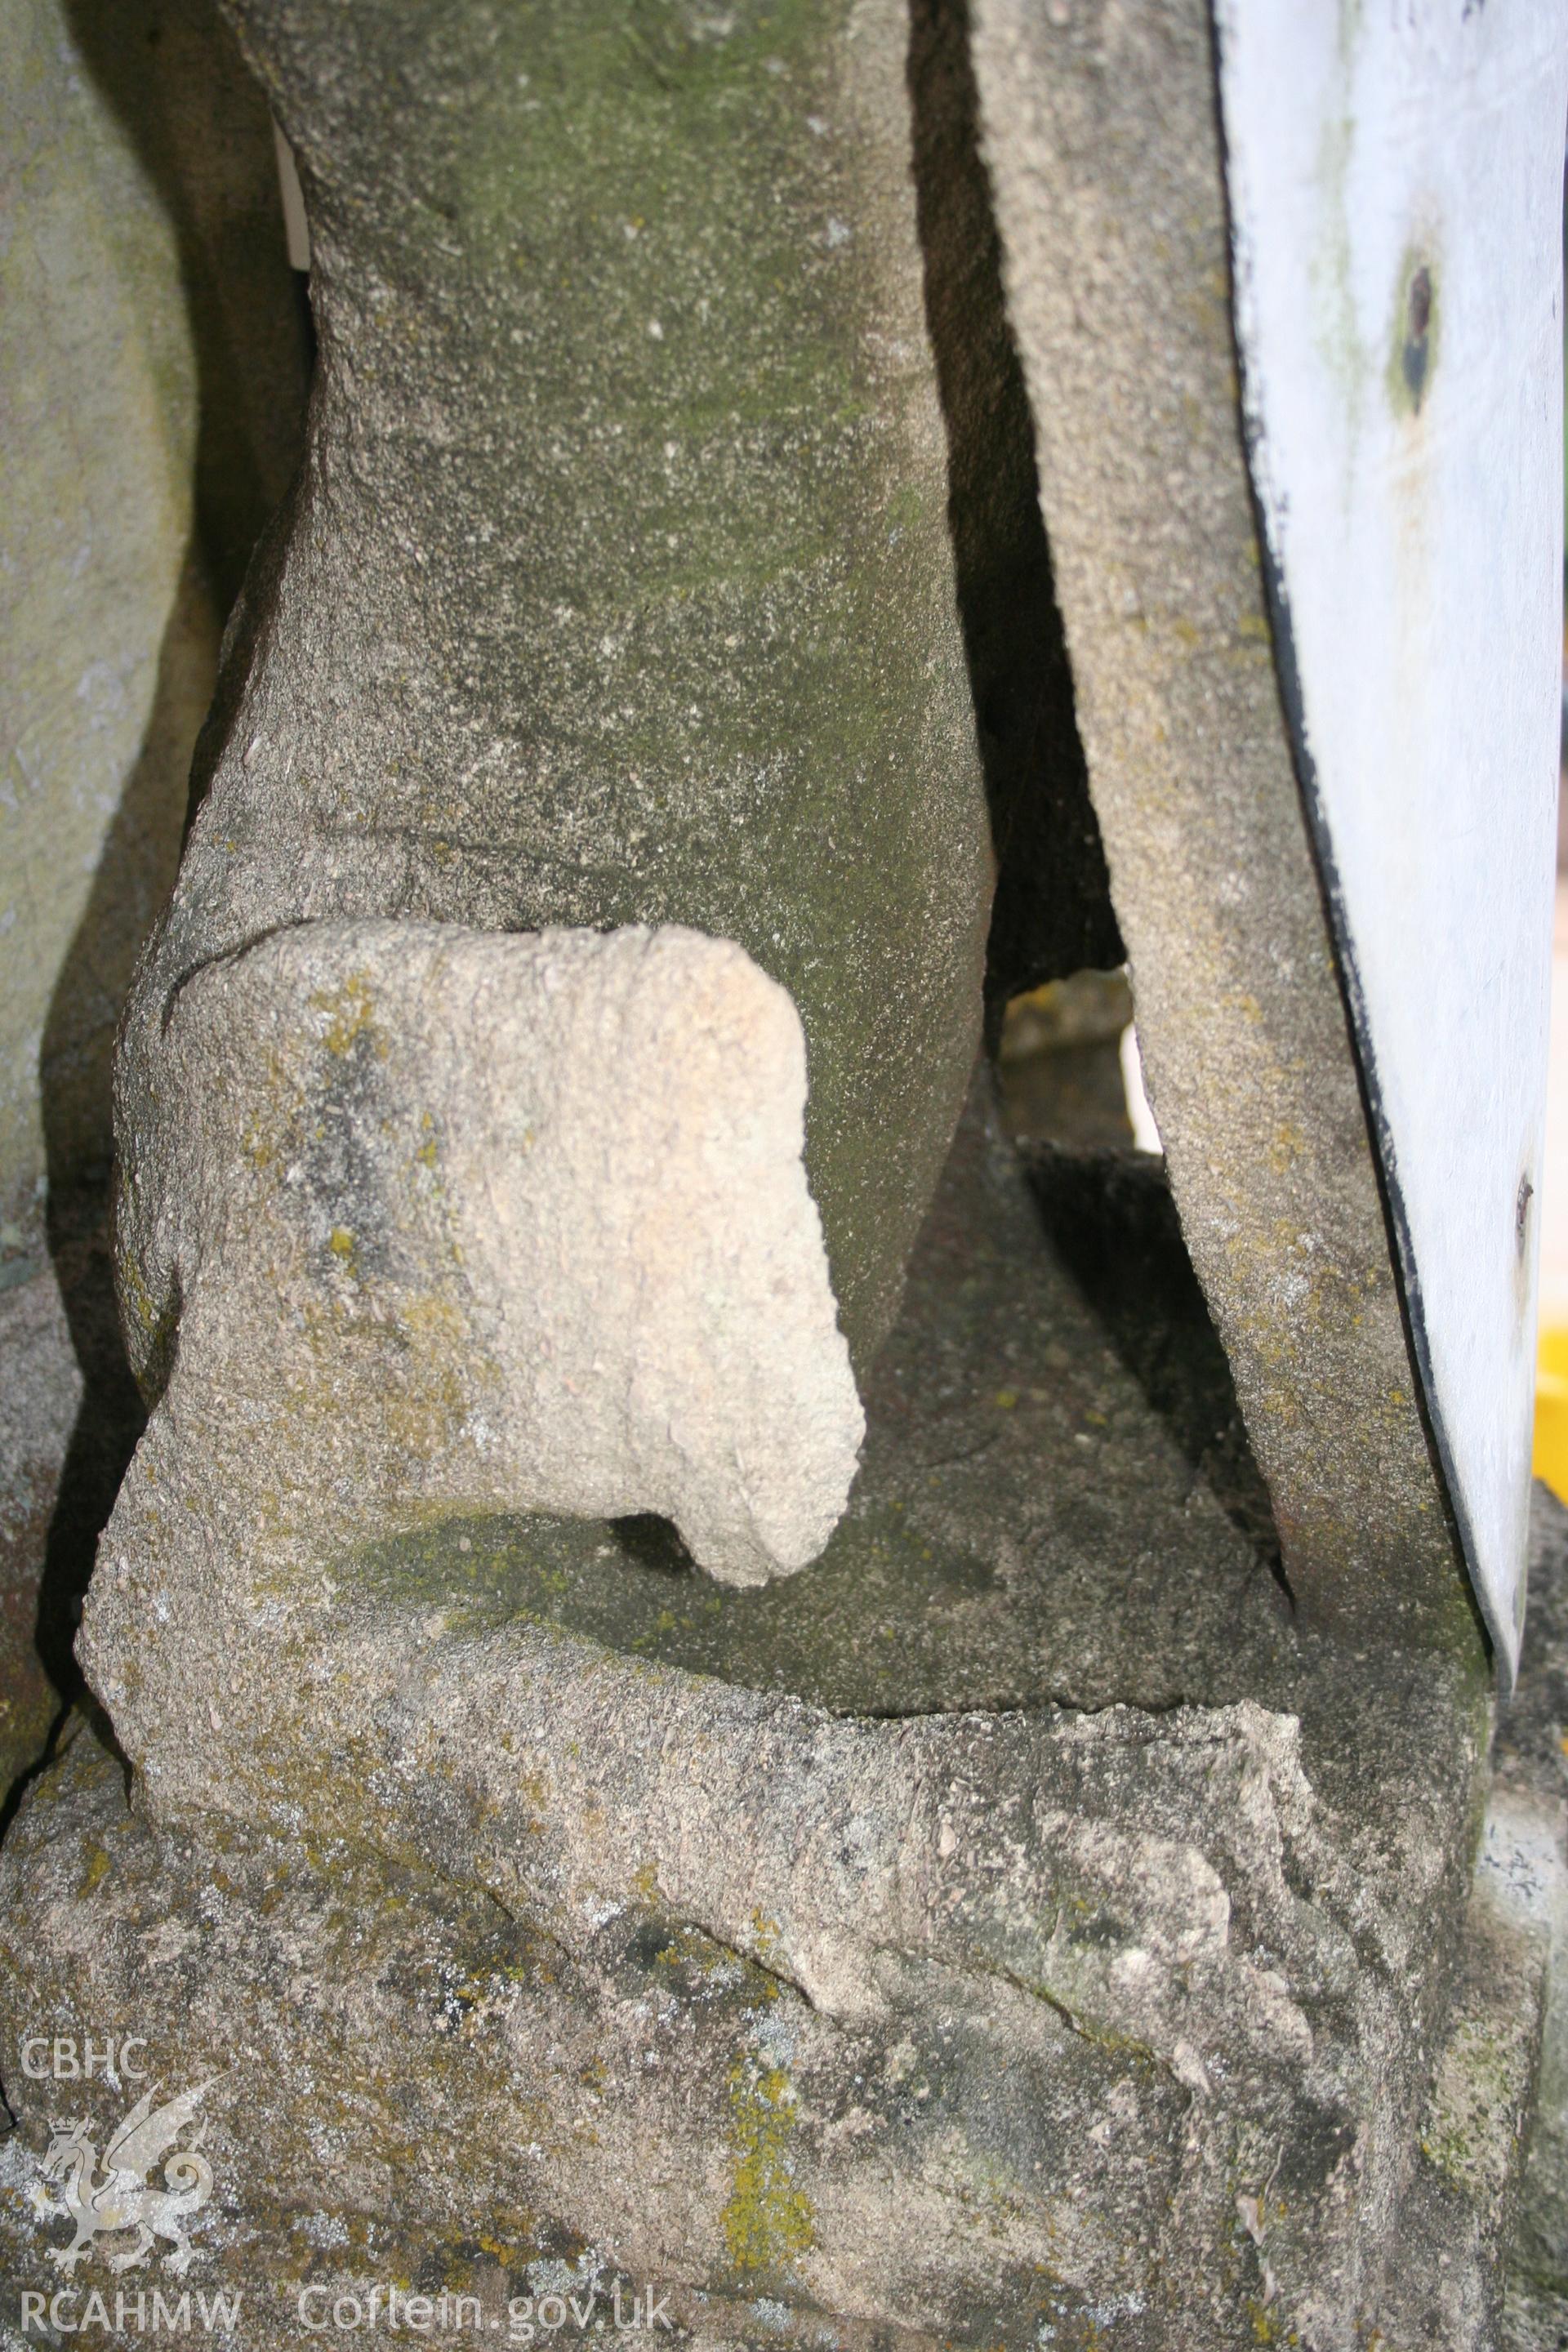 Sculptural detail on the Cornewall Lewis Memorial at New Radnor, taken by Cy Griffiths of Powys County Council, November 2011